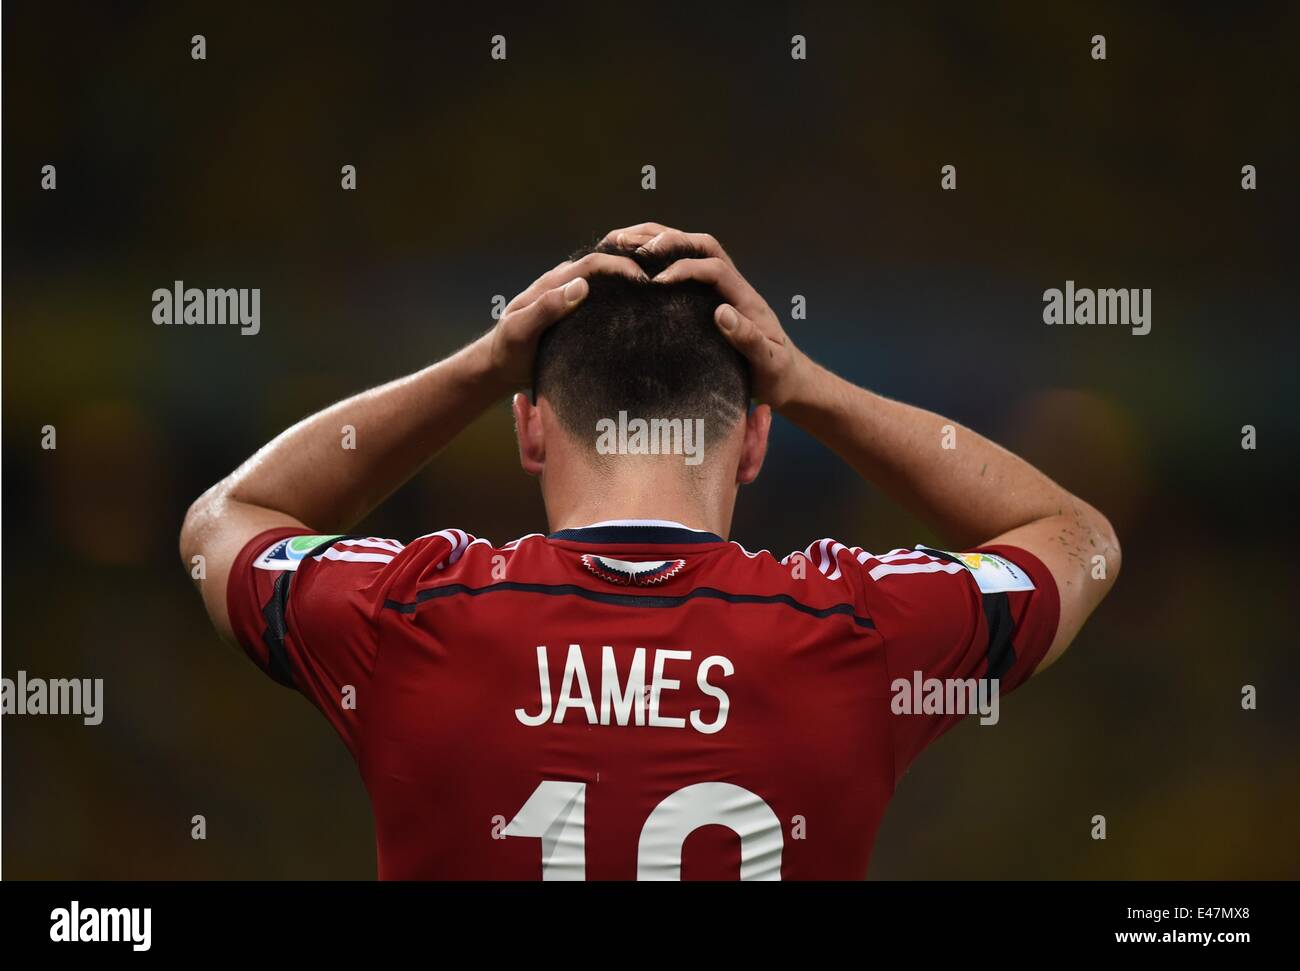 Fortaleza, Brazil. 04th July, 2014. James Rodriguez of Colombia reacts during the FIFA World Cup 2014 quarter final match soccer between Brazil and Colombia at the Estadio Castelao in Fortaleza, Brazil, 04 July 2014. Photo: Marius Becker/dpa/Alamy Live News Stock Photo